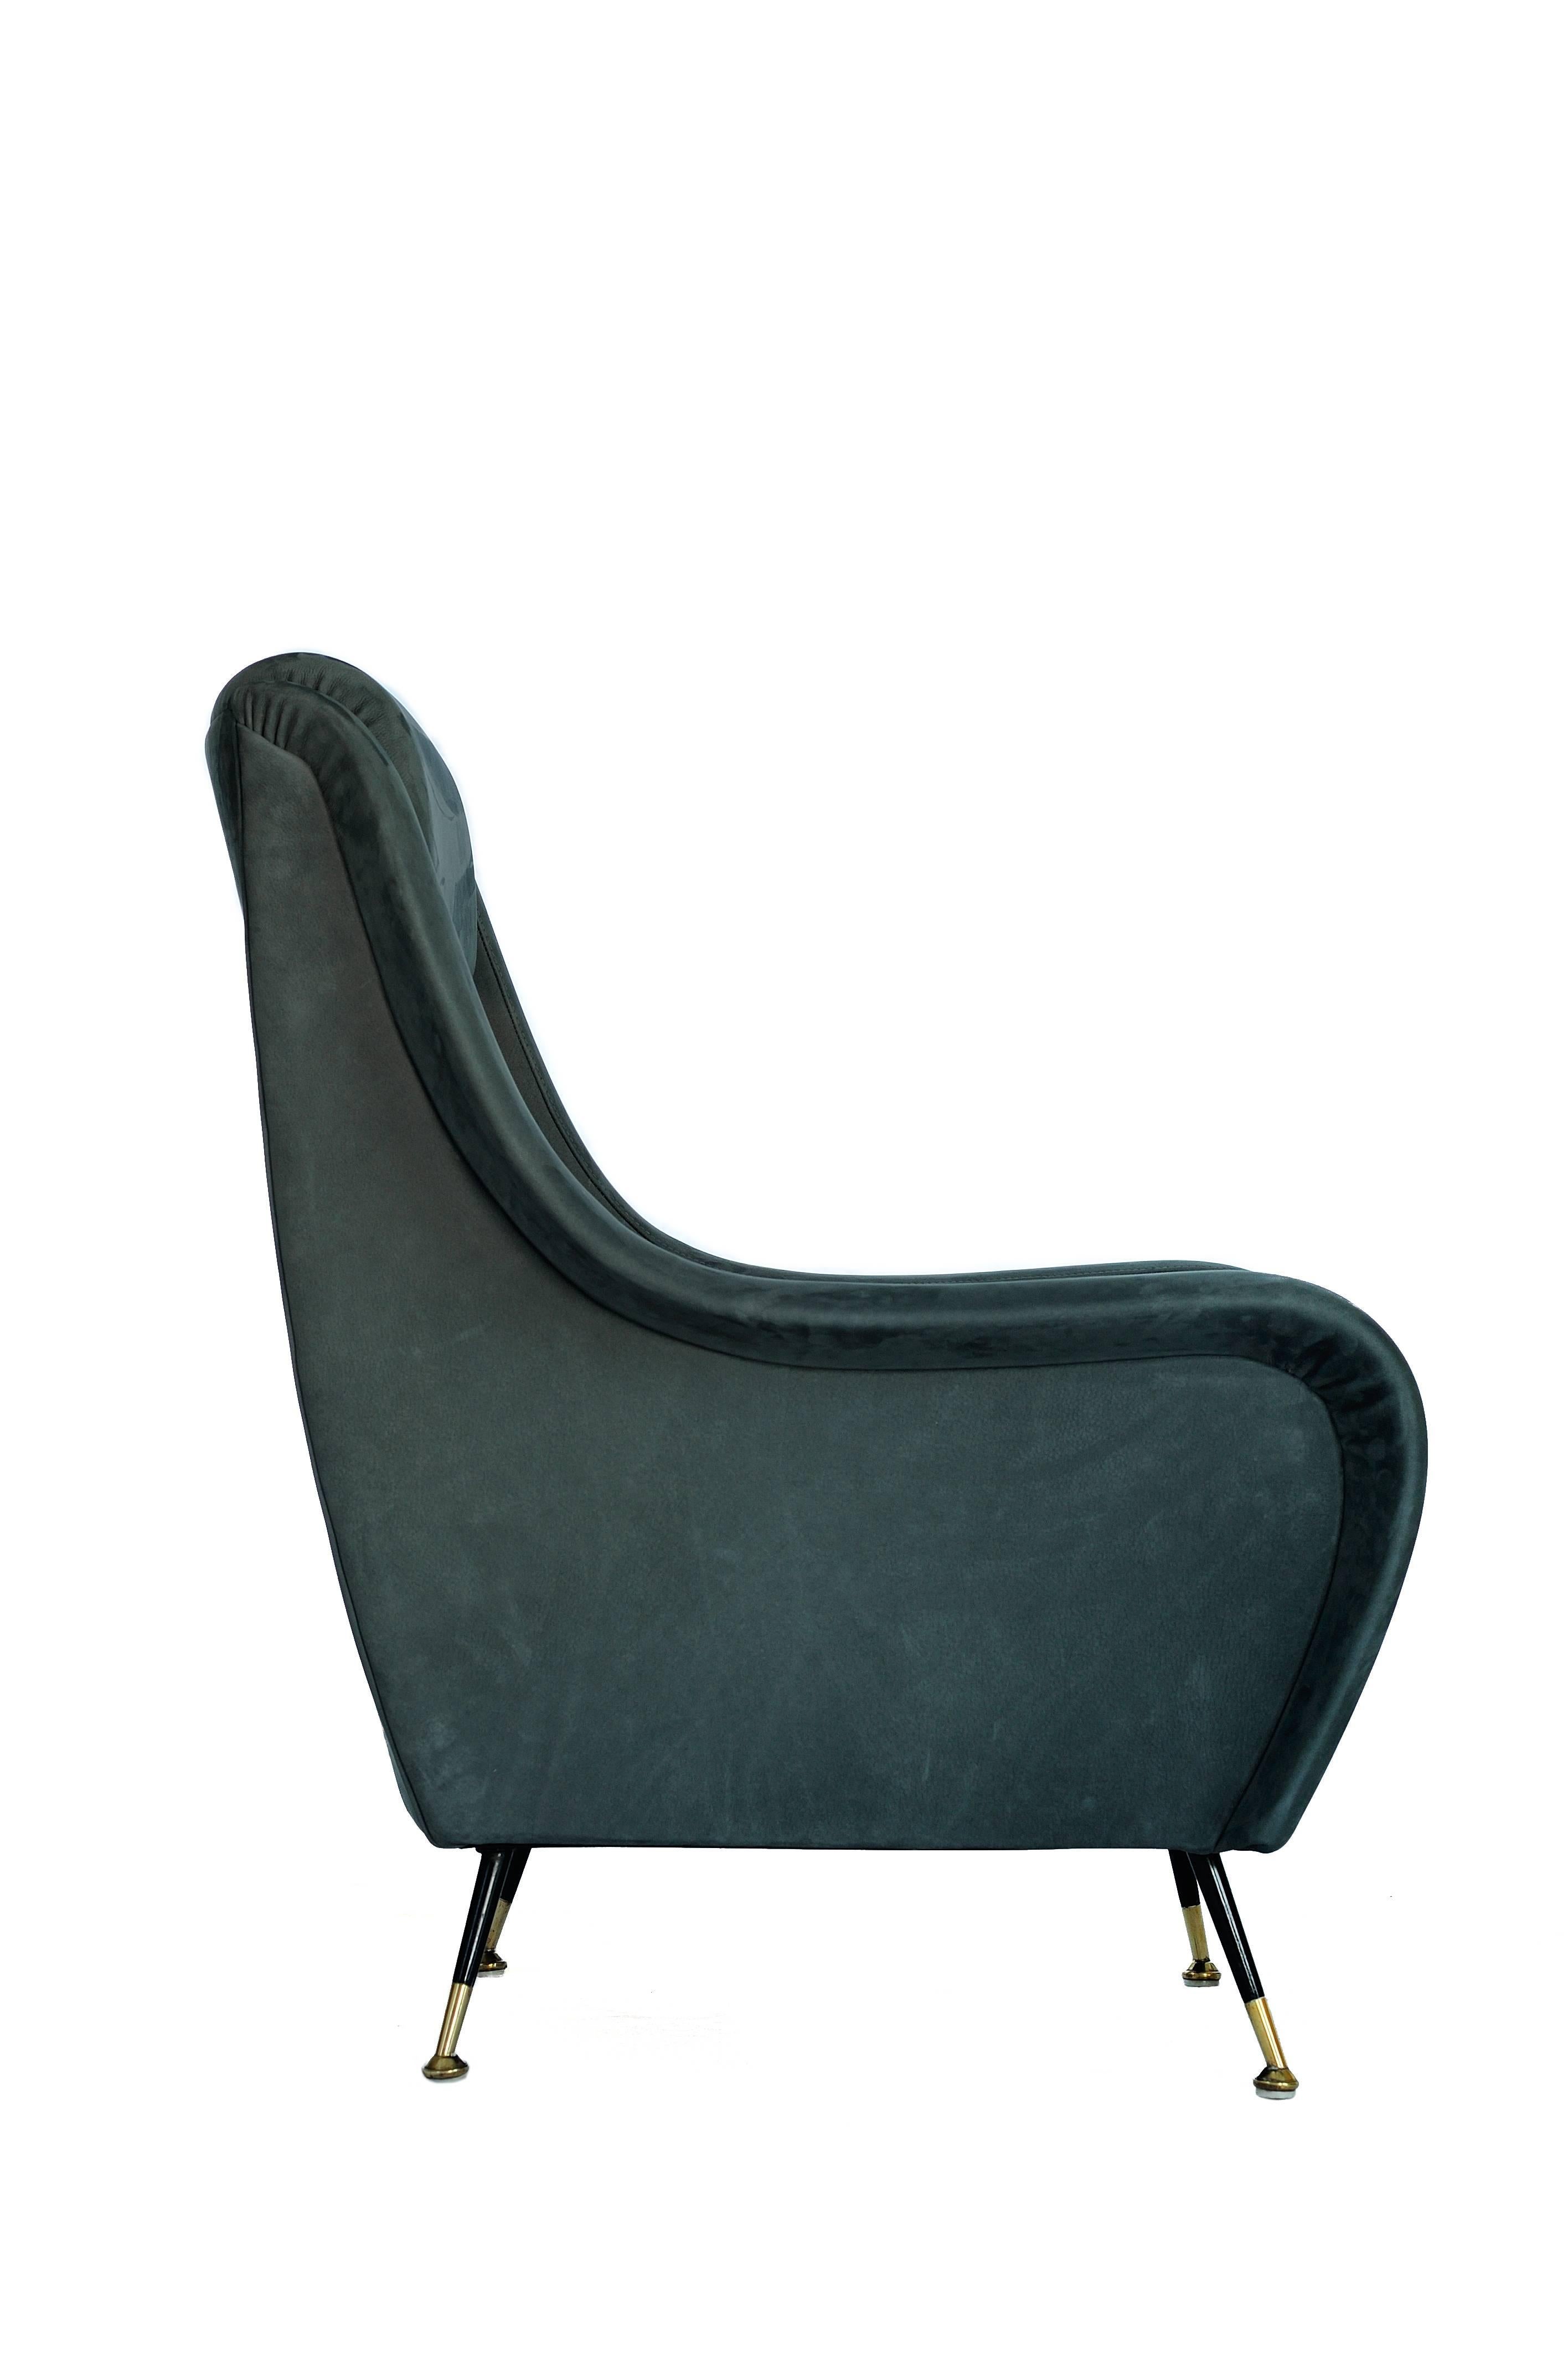 Other 1950s Inspired Contemporary Cone Shaped Leg Poplar Wood Nubuck Leather Armchairs For Sale